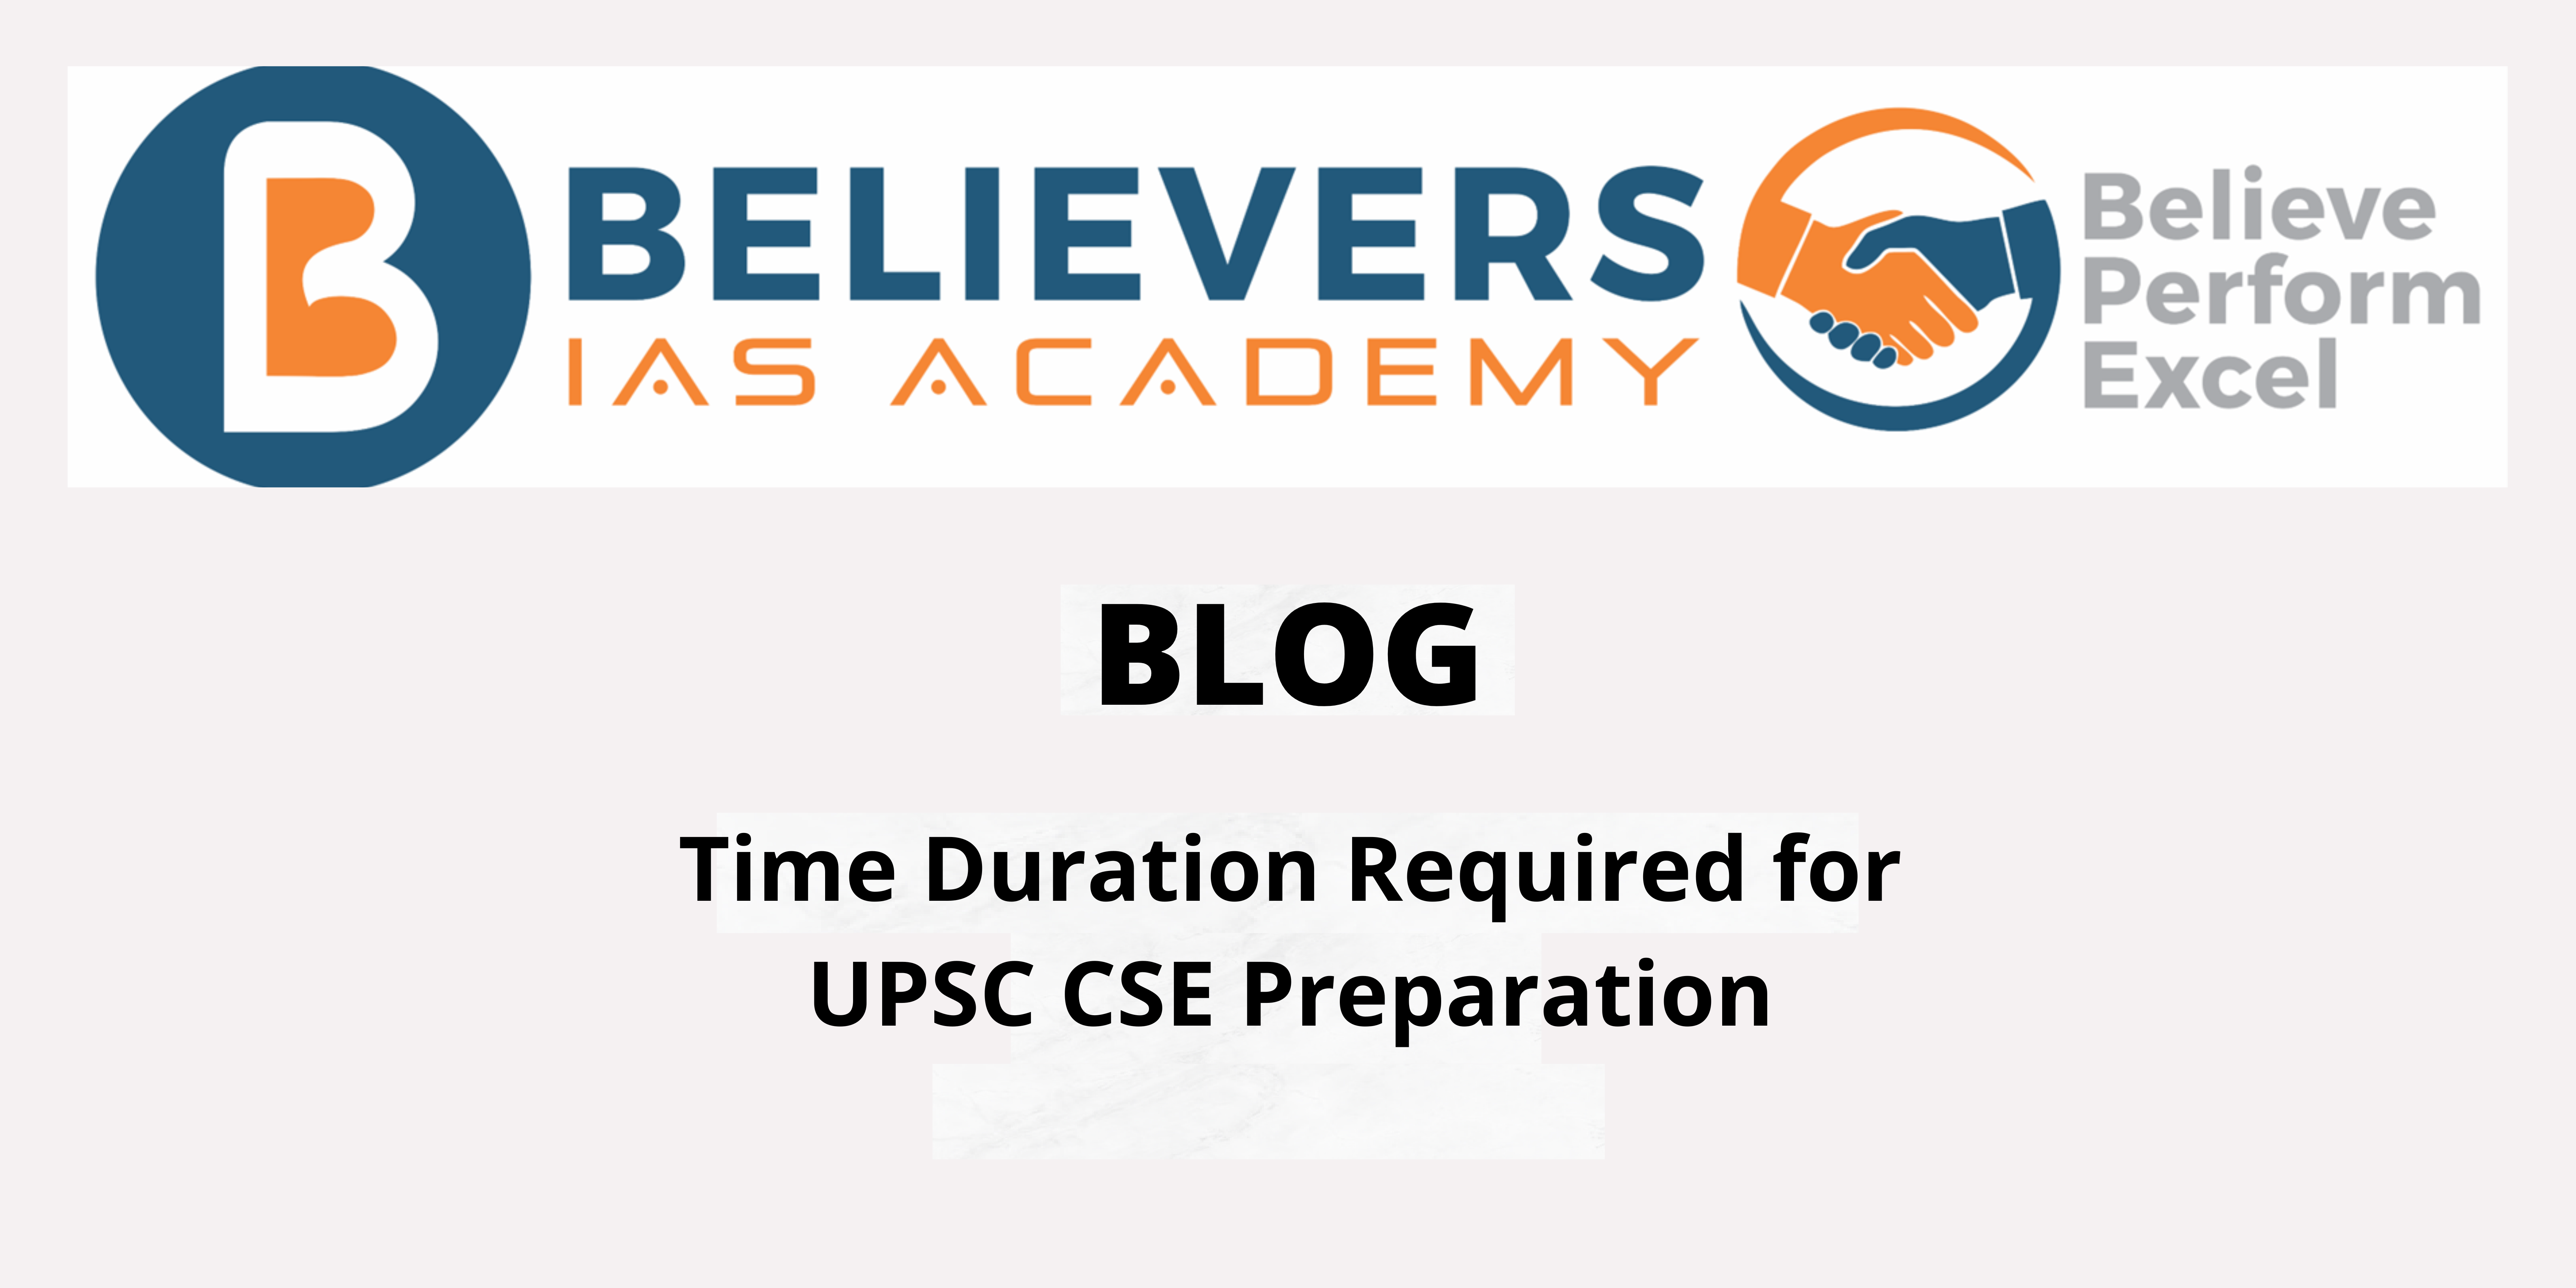 Time Duration Required for UPSC CSE Preparation